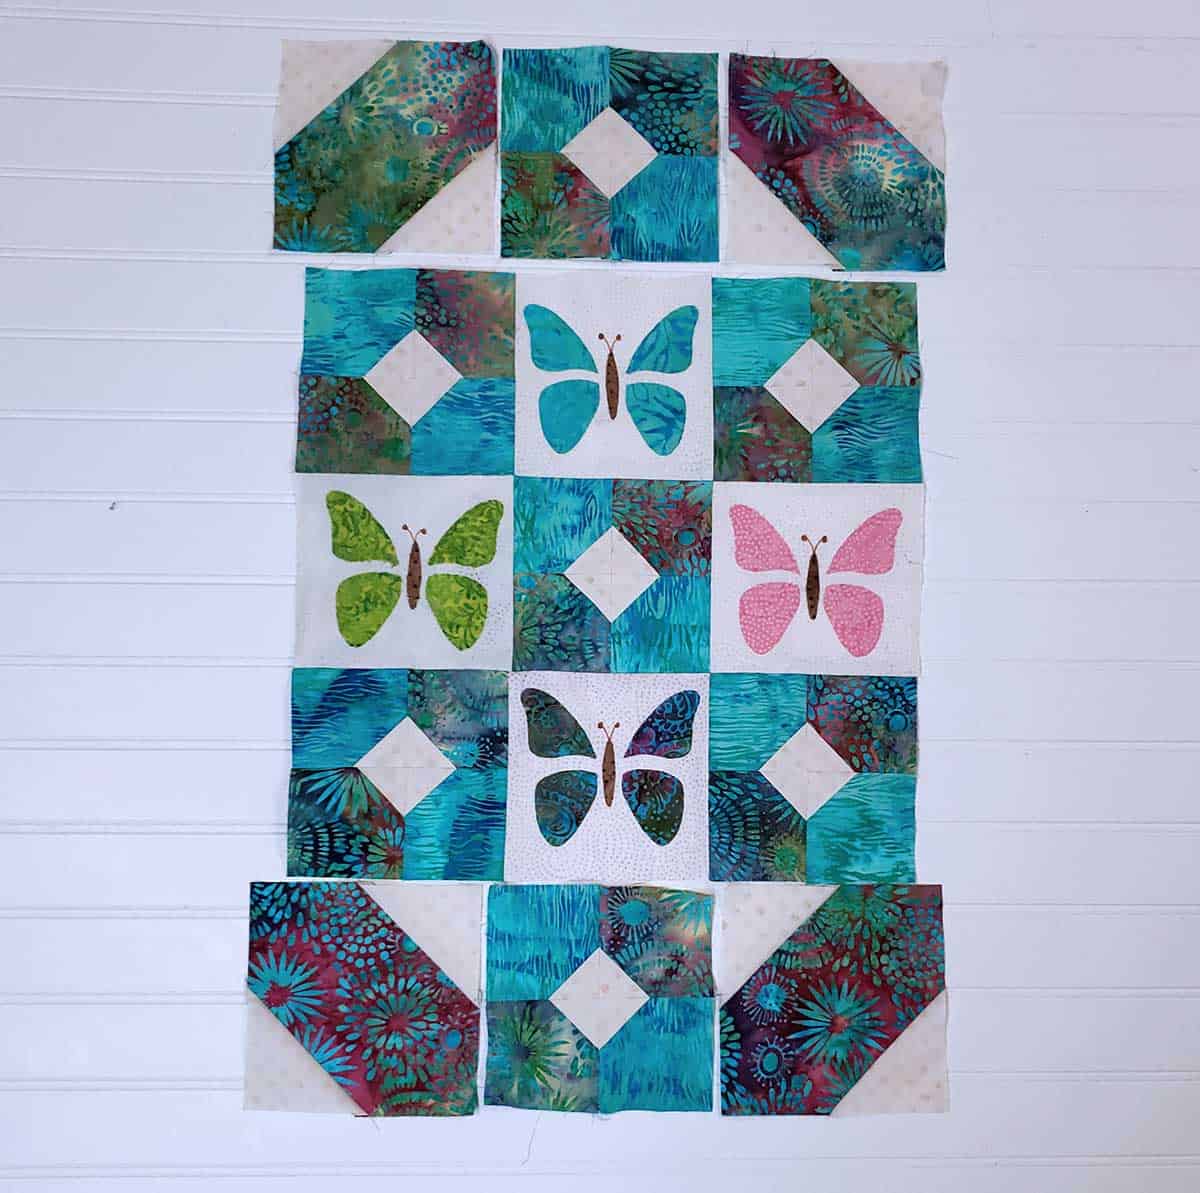 Laying out the blocks for the Butterfly Cage quilt